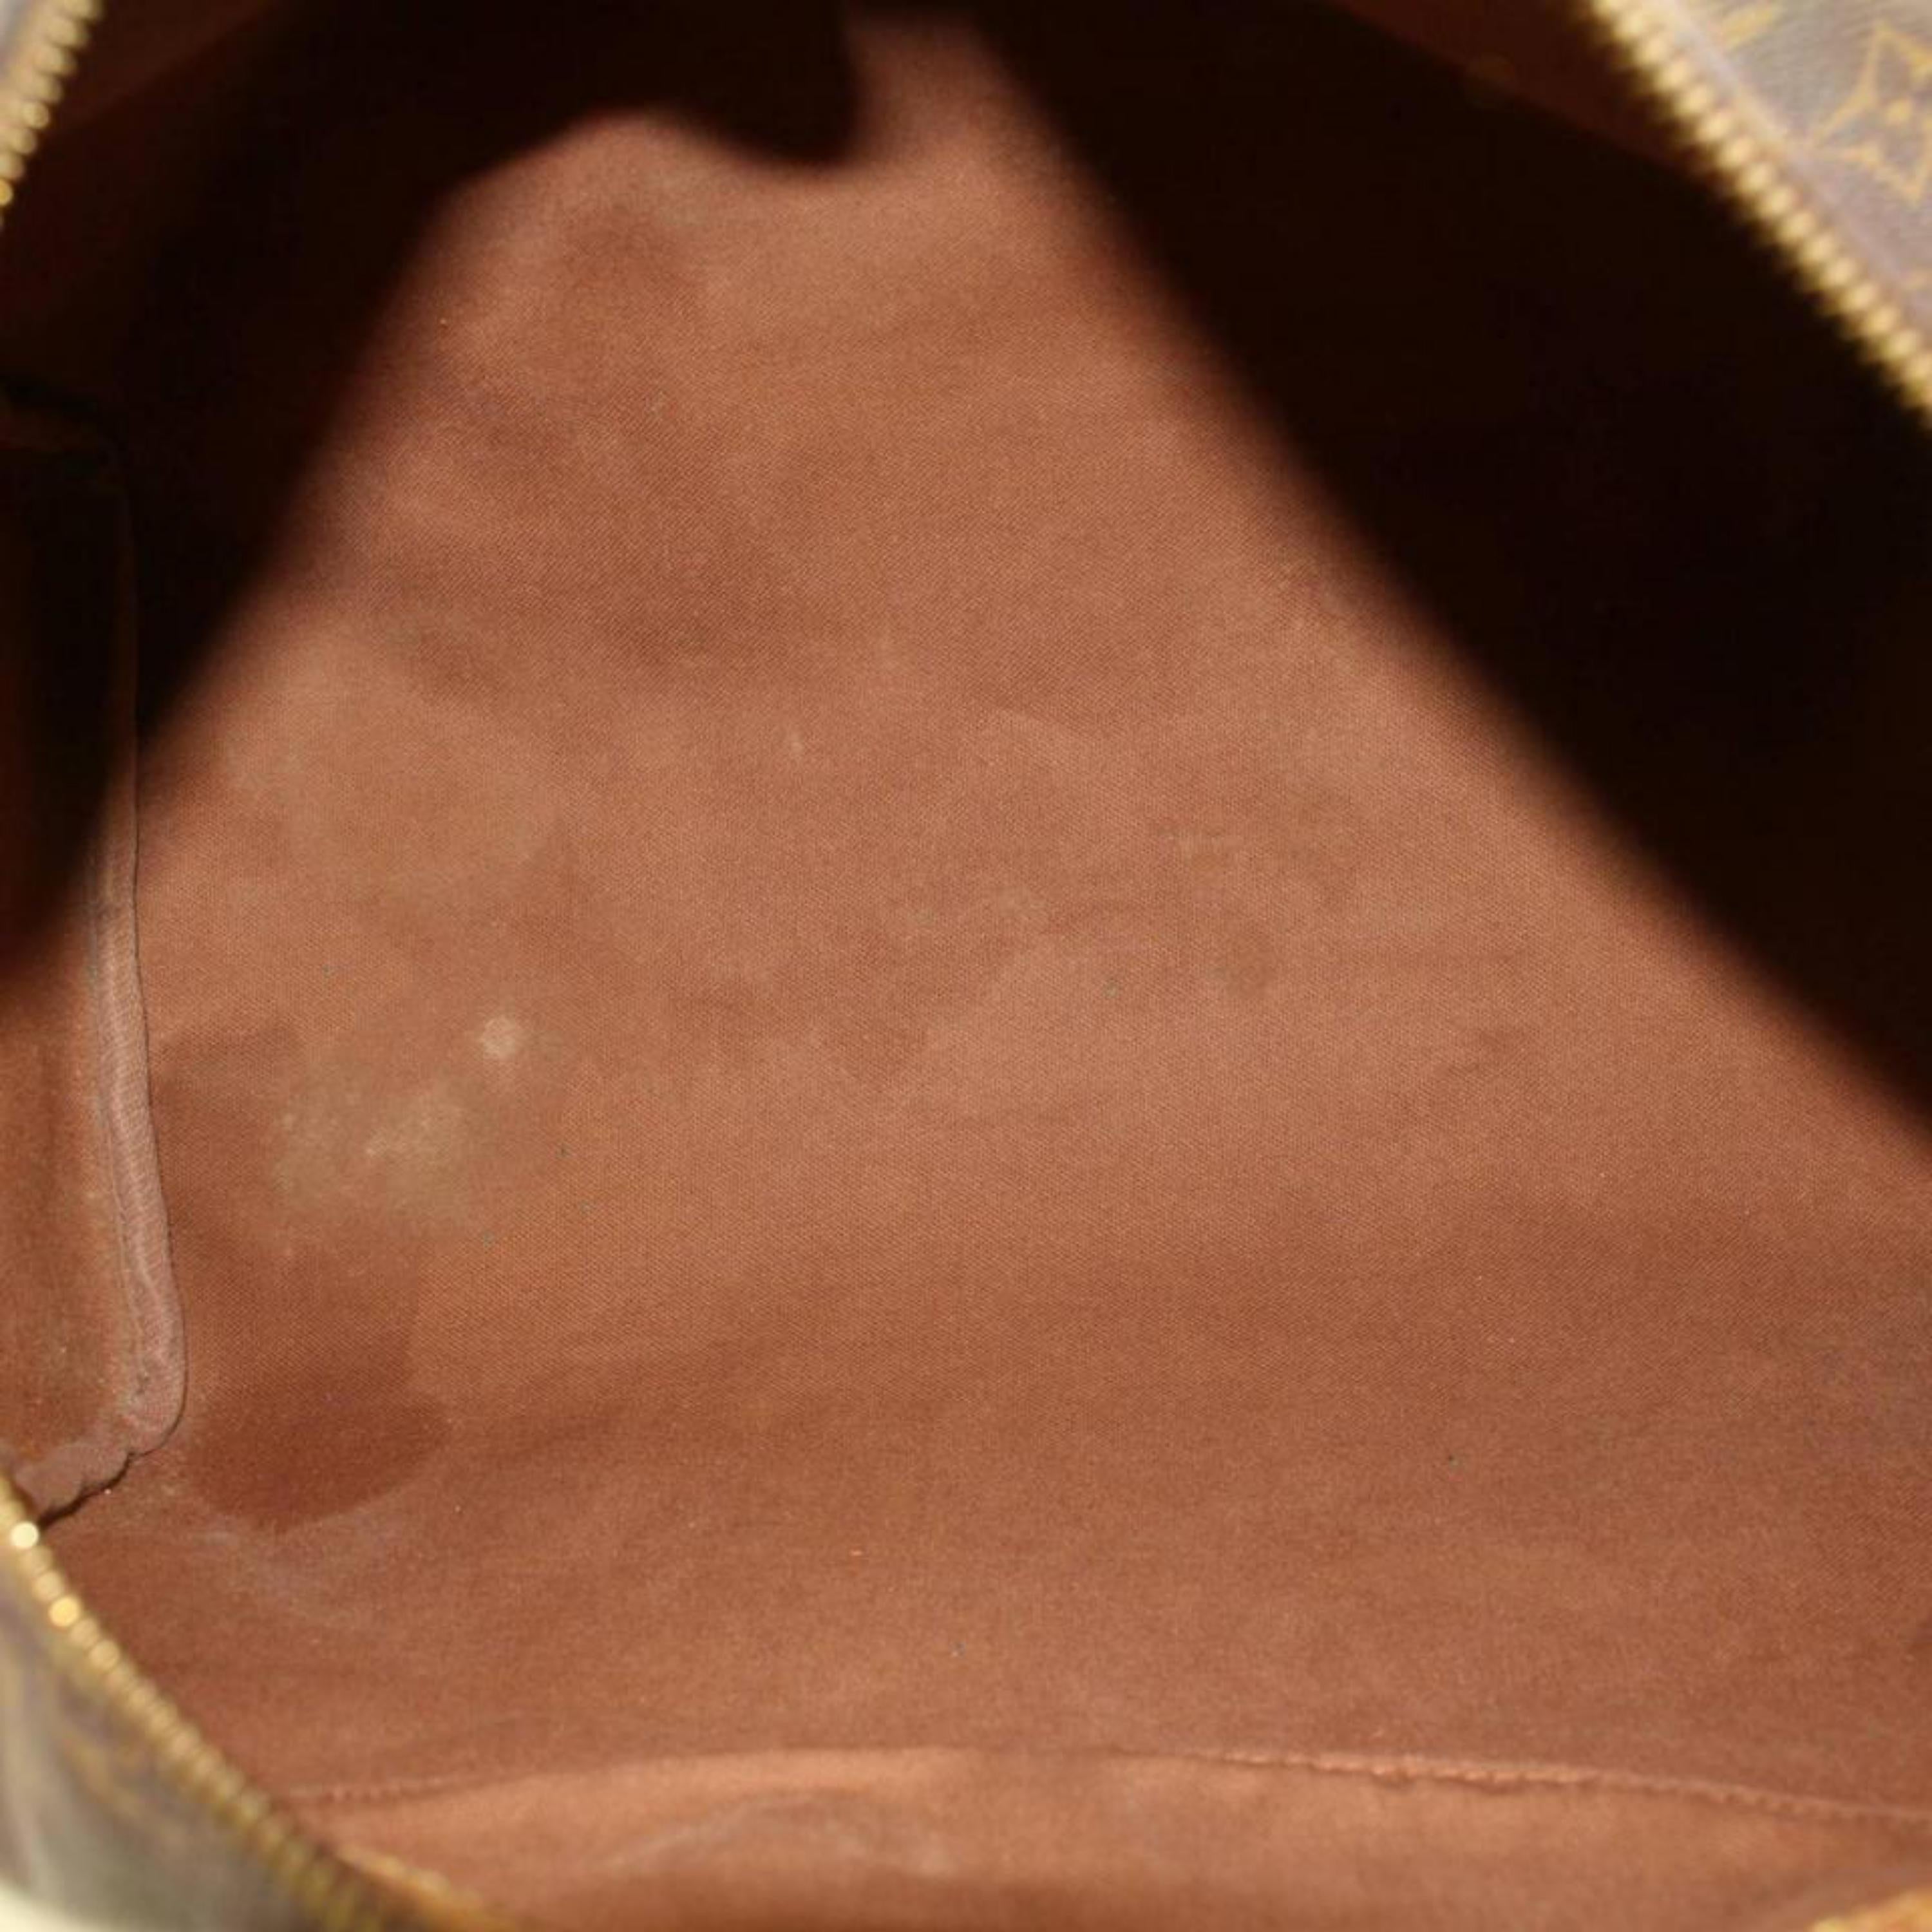 Louis Vuitton Speedy Large Monogram 35 869266 Brown Coated Canvas Satchel In Good Condition For Sale In Forest Hills, NY